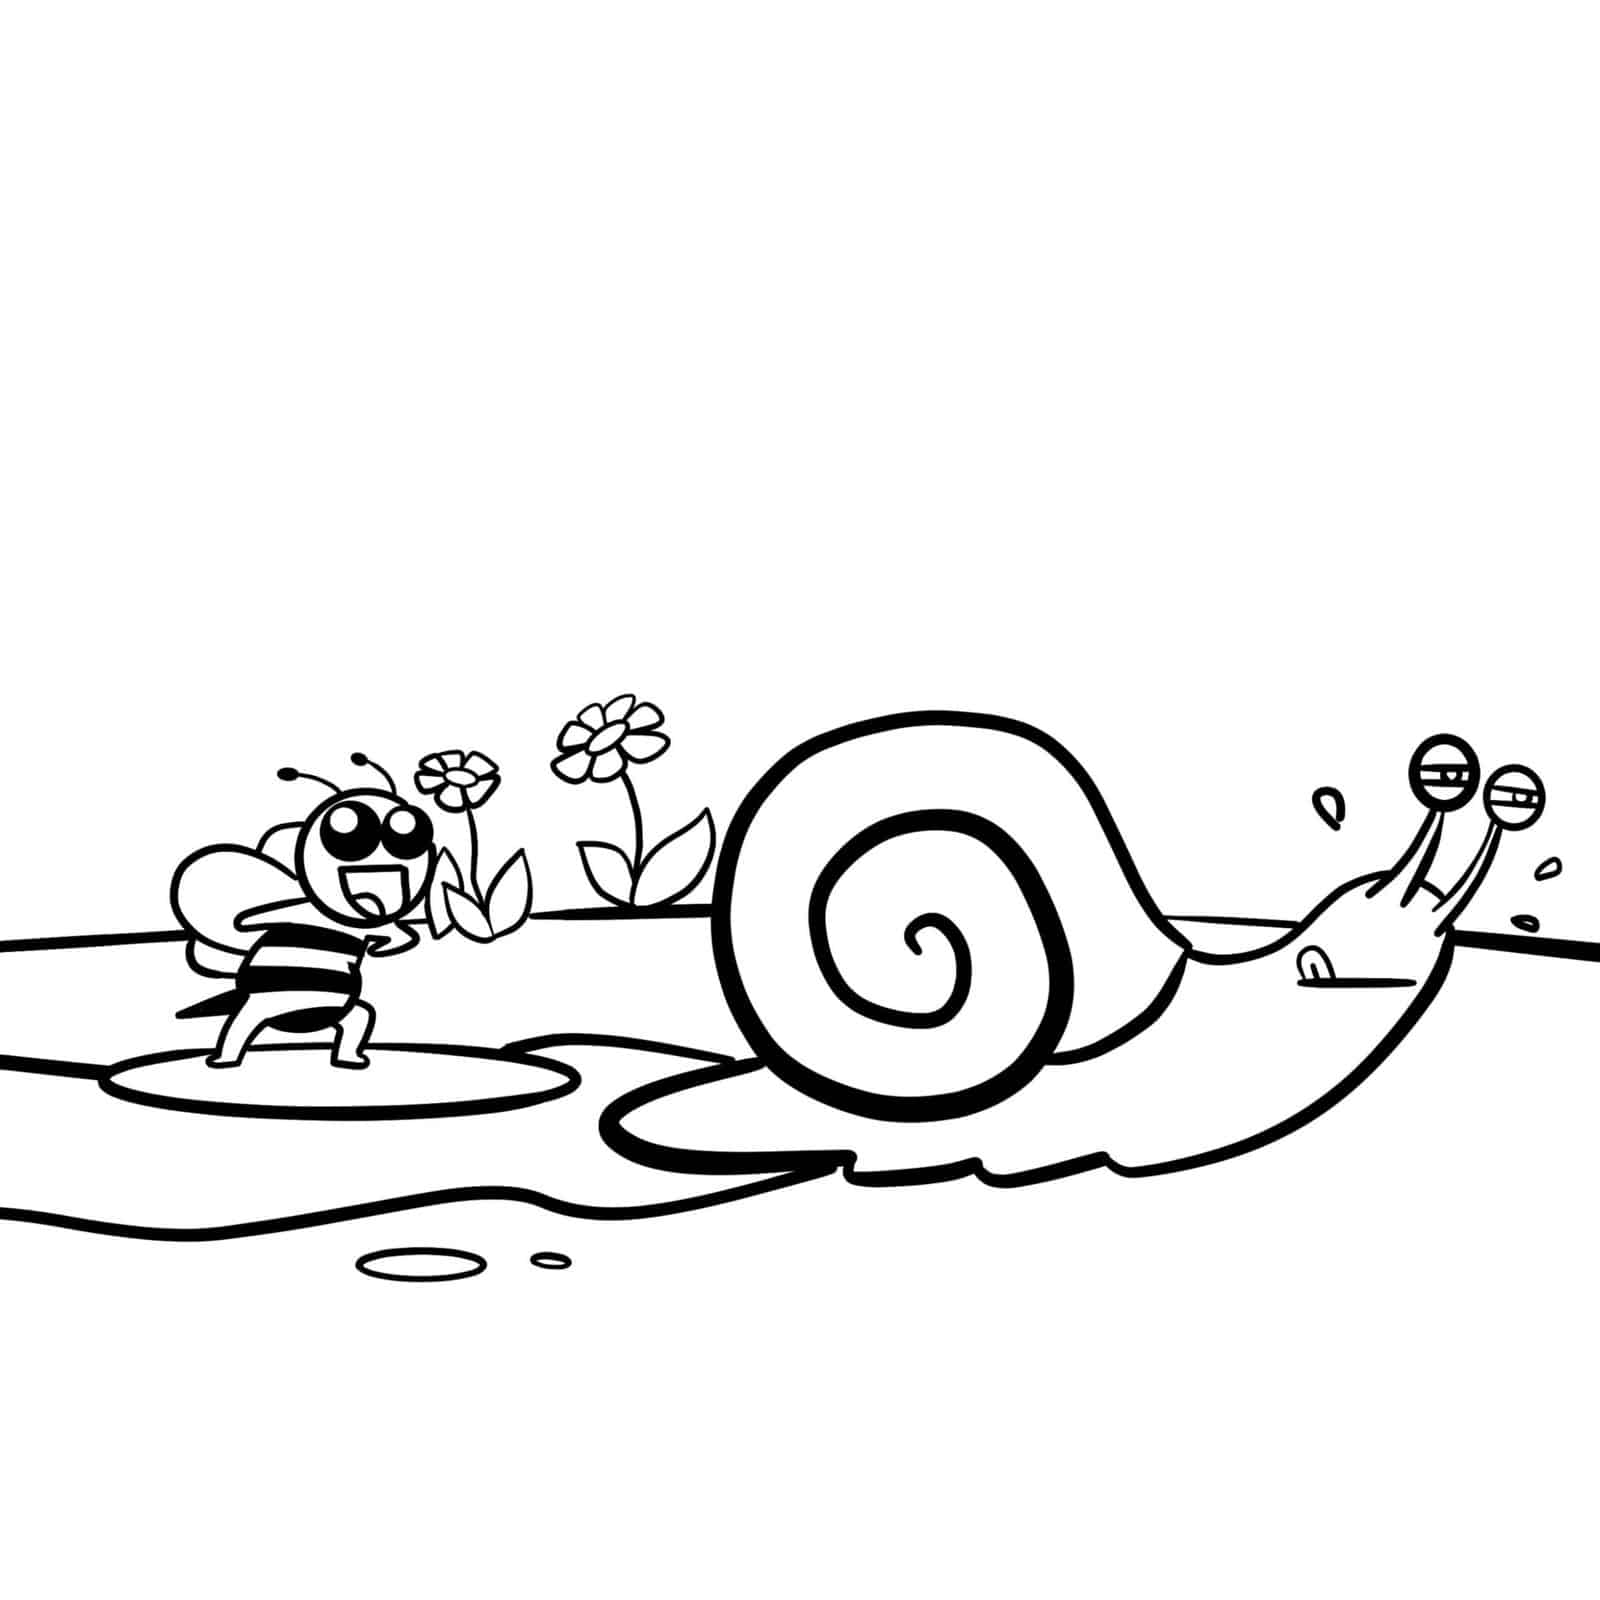 Snail gliding on slime with a bee following from What's an Ail?